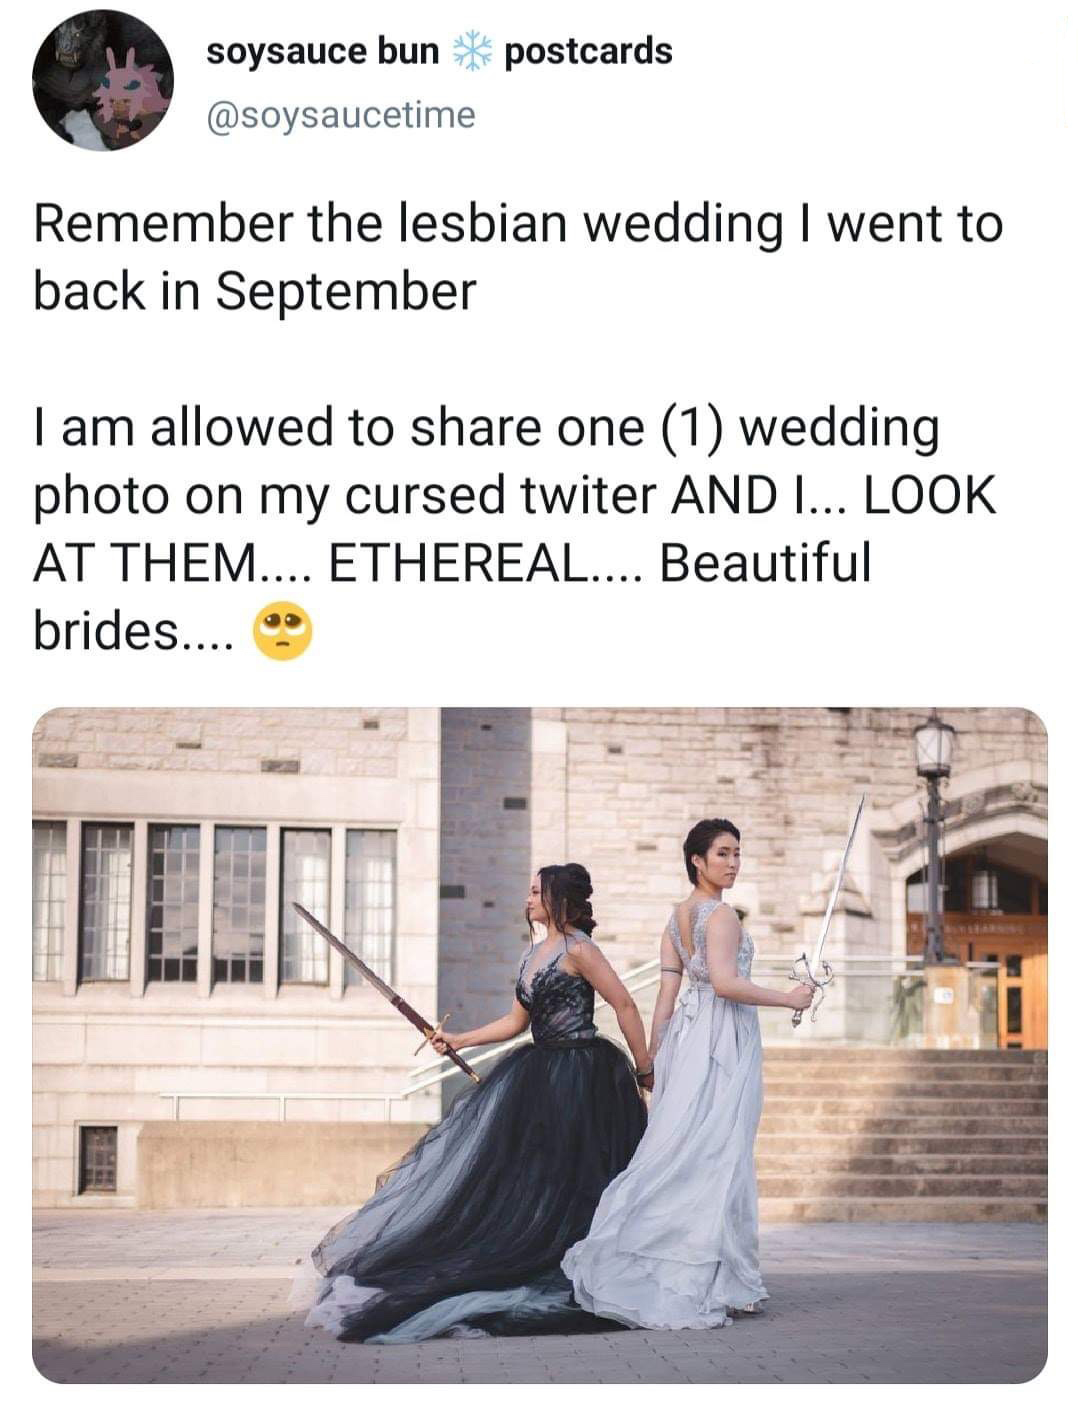 photograph - soysauce bun postcards Remember the lesbian wedding I went to back in September Tam allowed to one 1 wedding photo on my cursed twiter And I... Look At Them.... Ethereal.... Beautiful brides....